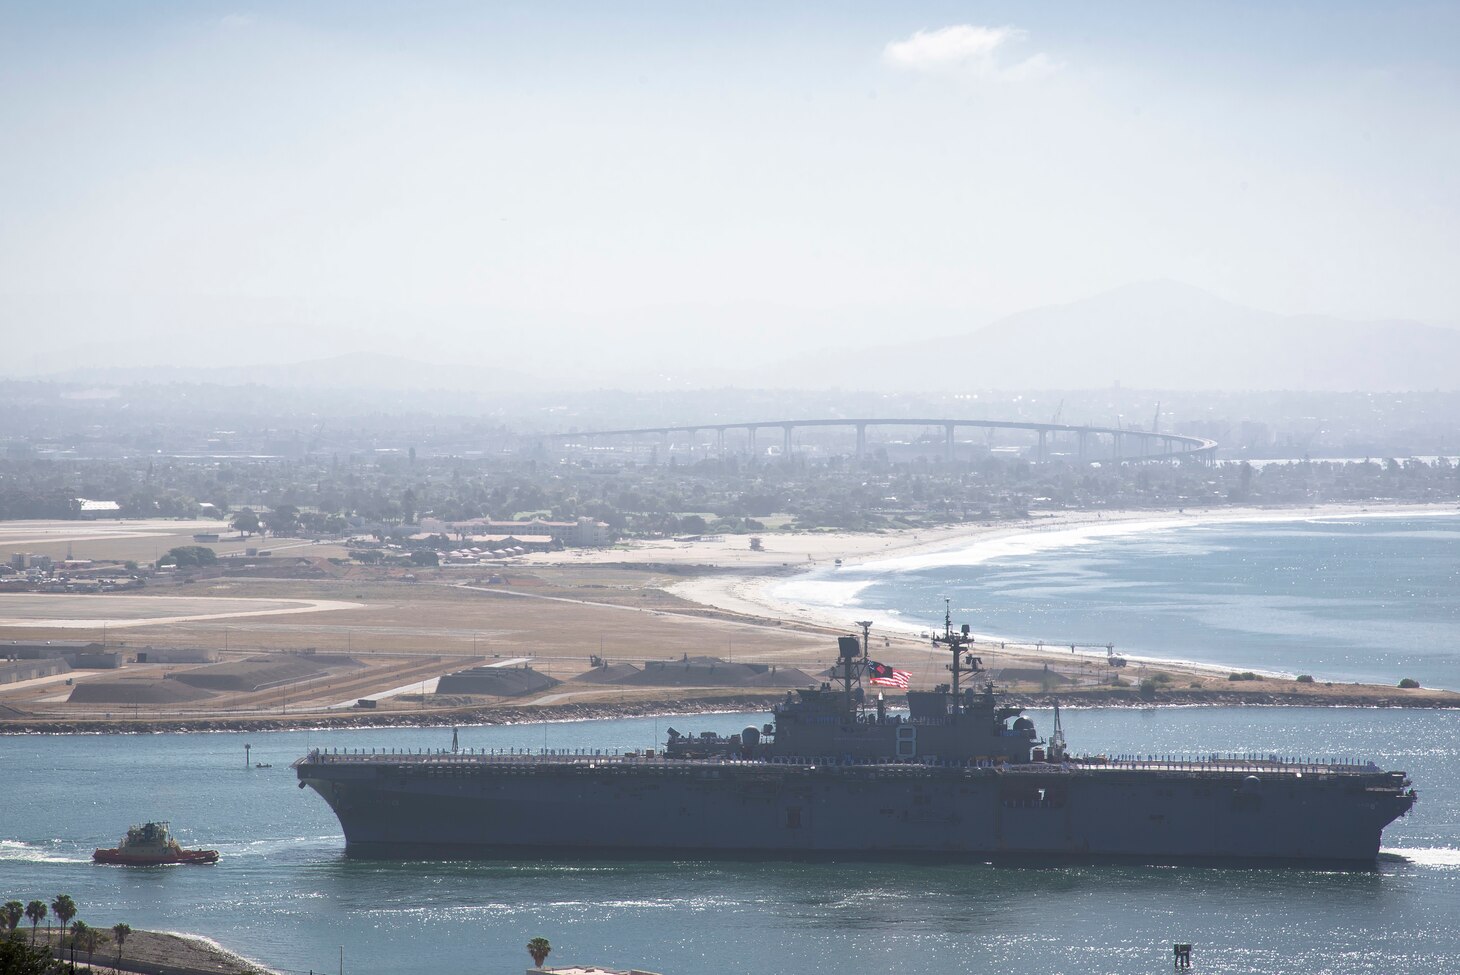 SAN DIEGO (May 23, 2021) Amphibious assault ship USS Makin Island (LHD 8) returns to Naval Base San Diego. Makin Island, lead ship of the Makin Island Amphibious Ready Group, returned to Naval Base San Diego May 23rd after a deployment to U.S. 3rd, 5th, 6th and 7th Fleets where they served as a crisis-response force for combatant commanders in the Africa, Central and Indo-Pacific Commands. (U.S. Navy photo by Mass Communication Specialist 2nd Class Robert S. Price/Released)